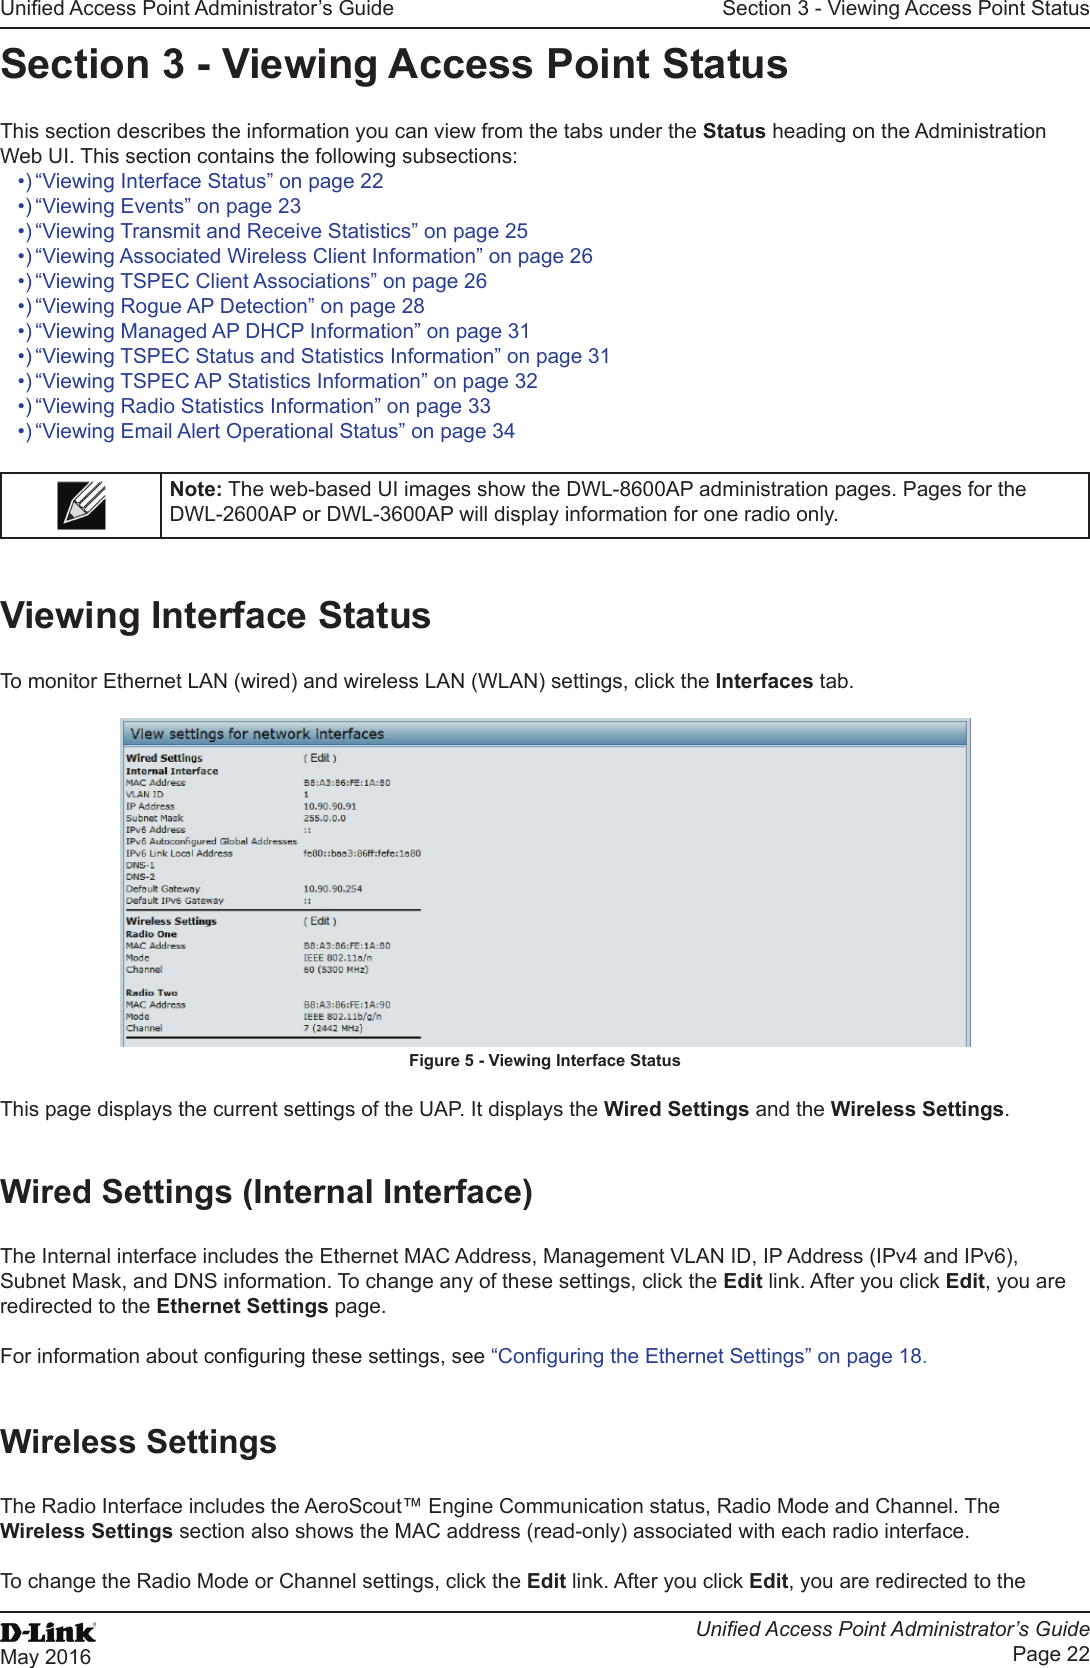 Unied Access Point Administrator’s GuideUnied Access Point Administrator’s GuidePage 22May 2016Section 3 - Viewing Access Point StatusSection 3 - Viewing Access Point StatusThis section describes the information you can view from the tabs under the Status heading on the Administration Web UI. This section contains the following subsections:•) “Viewing Interface Status” on page 22•) “Viewing Events” on page 23•) “Viewing Transmit and Receive Statistics” on page 25•) “Viewing Associated Wireless Client Information” on page 26•) “Viewing TSPEC Client Associations” on page 26•) “Viewing Rogue AP Detection” on page 28•) “Viewing Managed AP DHCP Information” on page 31•) “Viewing TSPEC Status and Statistics Information” on page 31•) “Viewing TSPEC AP Statistics Information” on page 32•) “Viewing Radio Statistics Information” on page 33•) “Viewing Email Alert Operational Status” on page 34Note: The web-based UI images show the DWL-8600AP administration pages. Pages for the DWL-2600AP or DWL-3600AP will display information for one radio only.Viewing Interface StatusTo monitor Ethernet LAN (wired) and wireless LAN (WLAN) settings, click the Interfaces tab.Figure 5 - Viewing Interface StatusThis page displays the current settings of the UAP. It displays the Wired Settings and the Wireless Settings.Wired Settings (Internal Interface)The Internal interface includes the Ethernet MAC Address, Management VLAN ID, IP Address (IPv4 and IPv6), Subnet Mask, and DNS information. To change any of these settings, click the Edit link. After you click Edit, you are redirected to the Ethernet Settings page.For information about conguring these settings, see “Conguring the Ethernet Settings” on page 18.Wireless SettingsThe Radio Interface includes the AeroScout™ Engine Communication status, Radio Mode and Channel. The Wireless Settings section also shows the MAC address (read-only) associated with each radio interface. To change the Radio Mode or Channel settings, click the Edit link. After you click Edit, you are redirected to the 